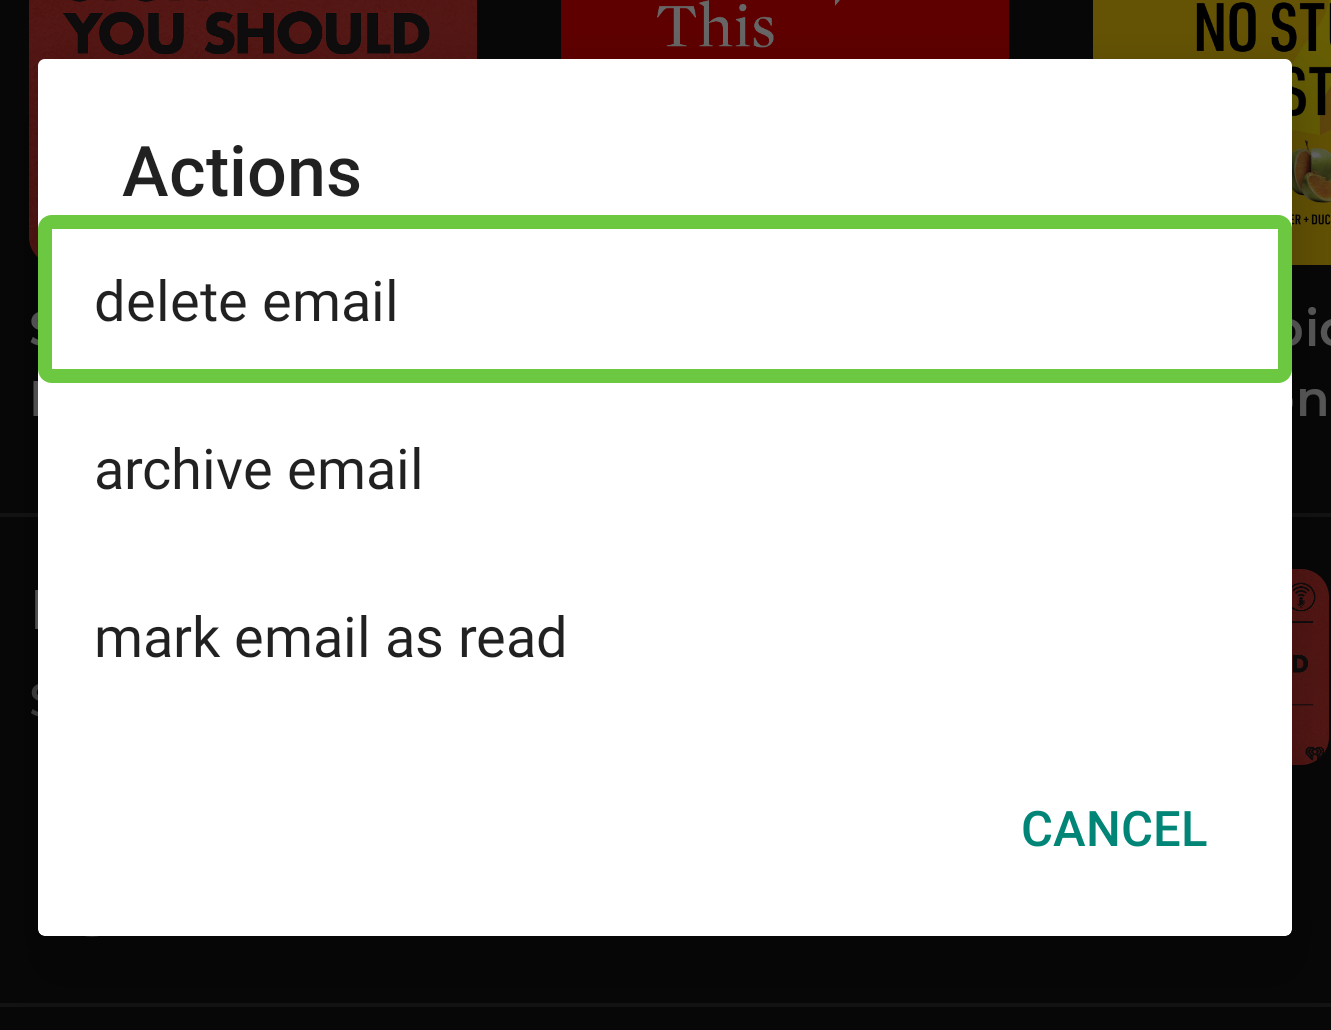 Dialog with title "actions" showing options "delete email", "archive email", and "mark email as read"